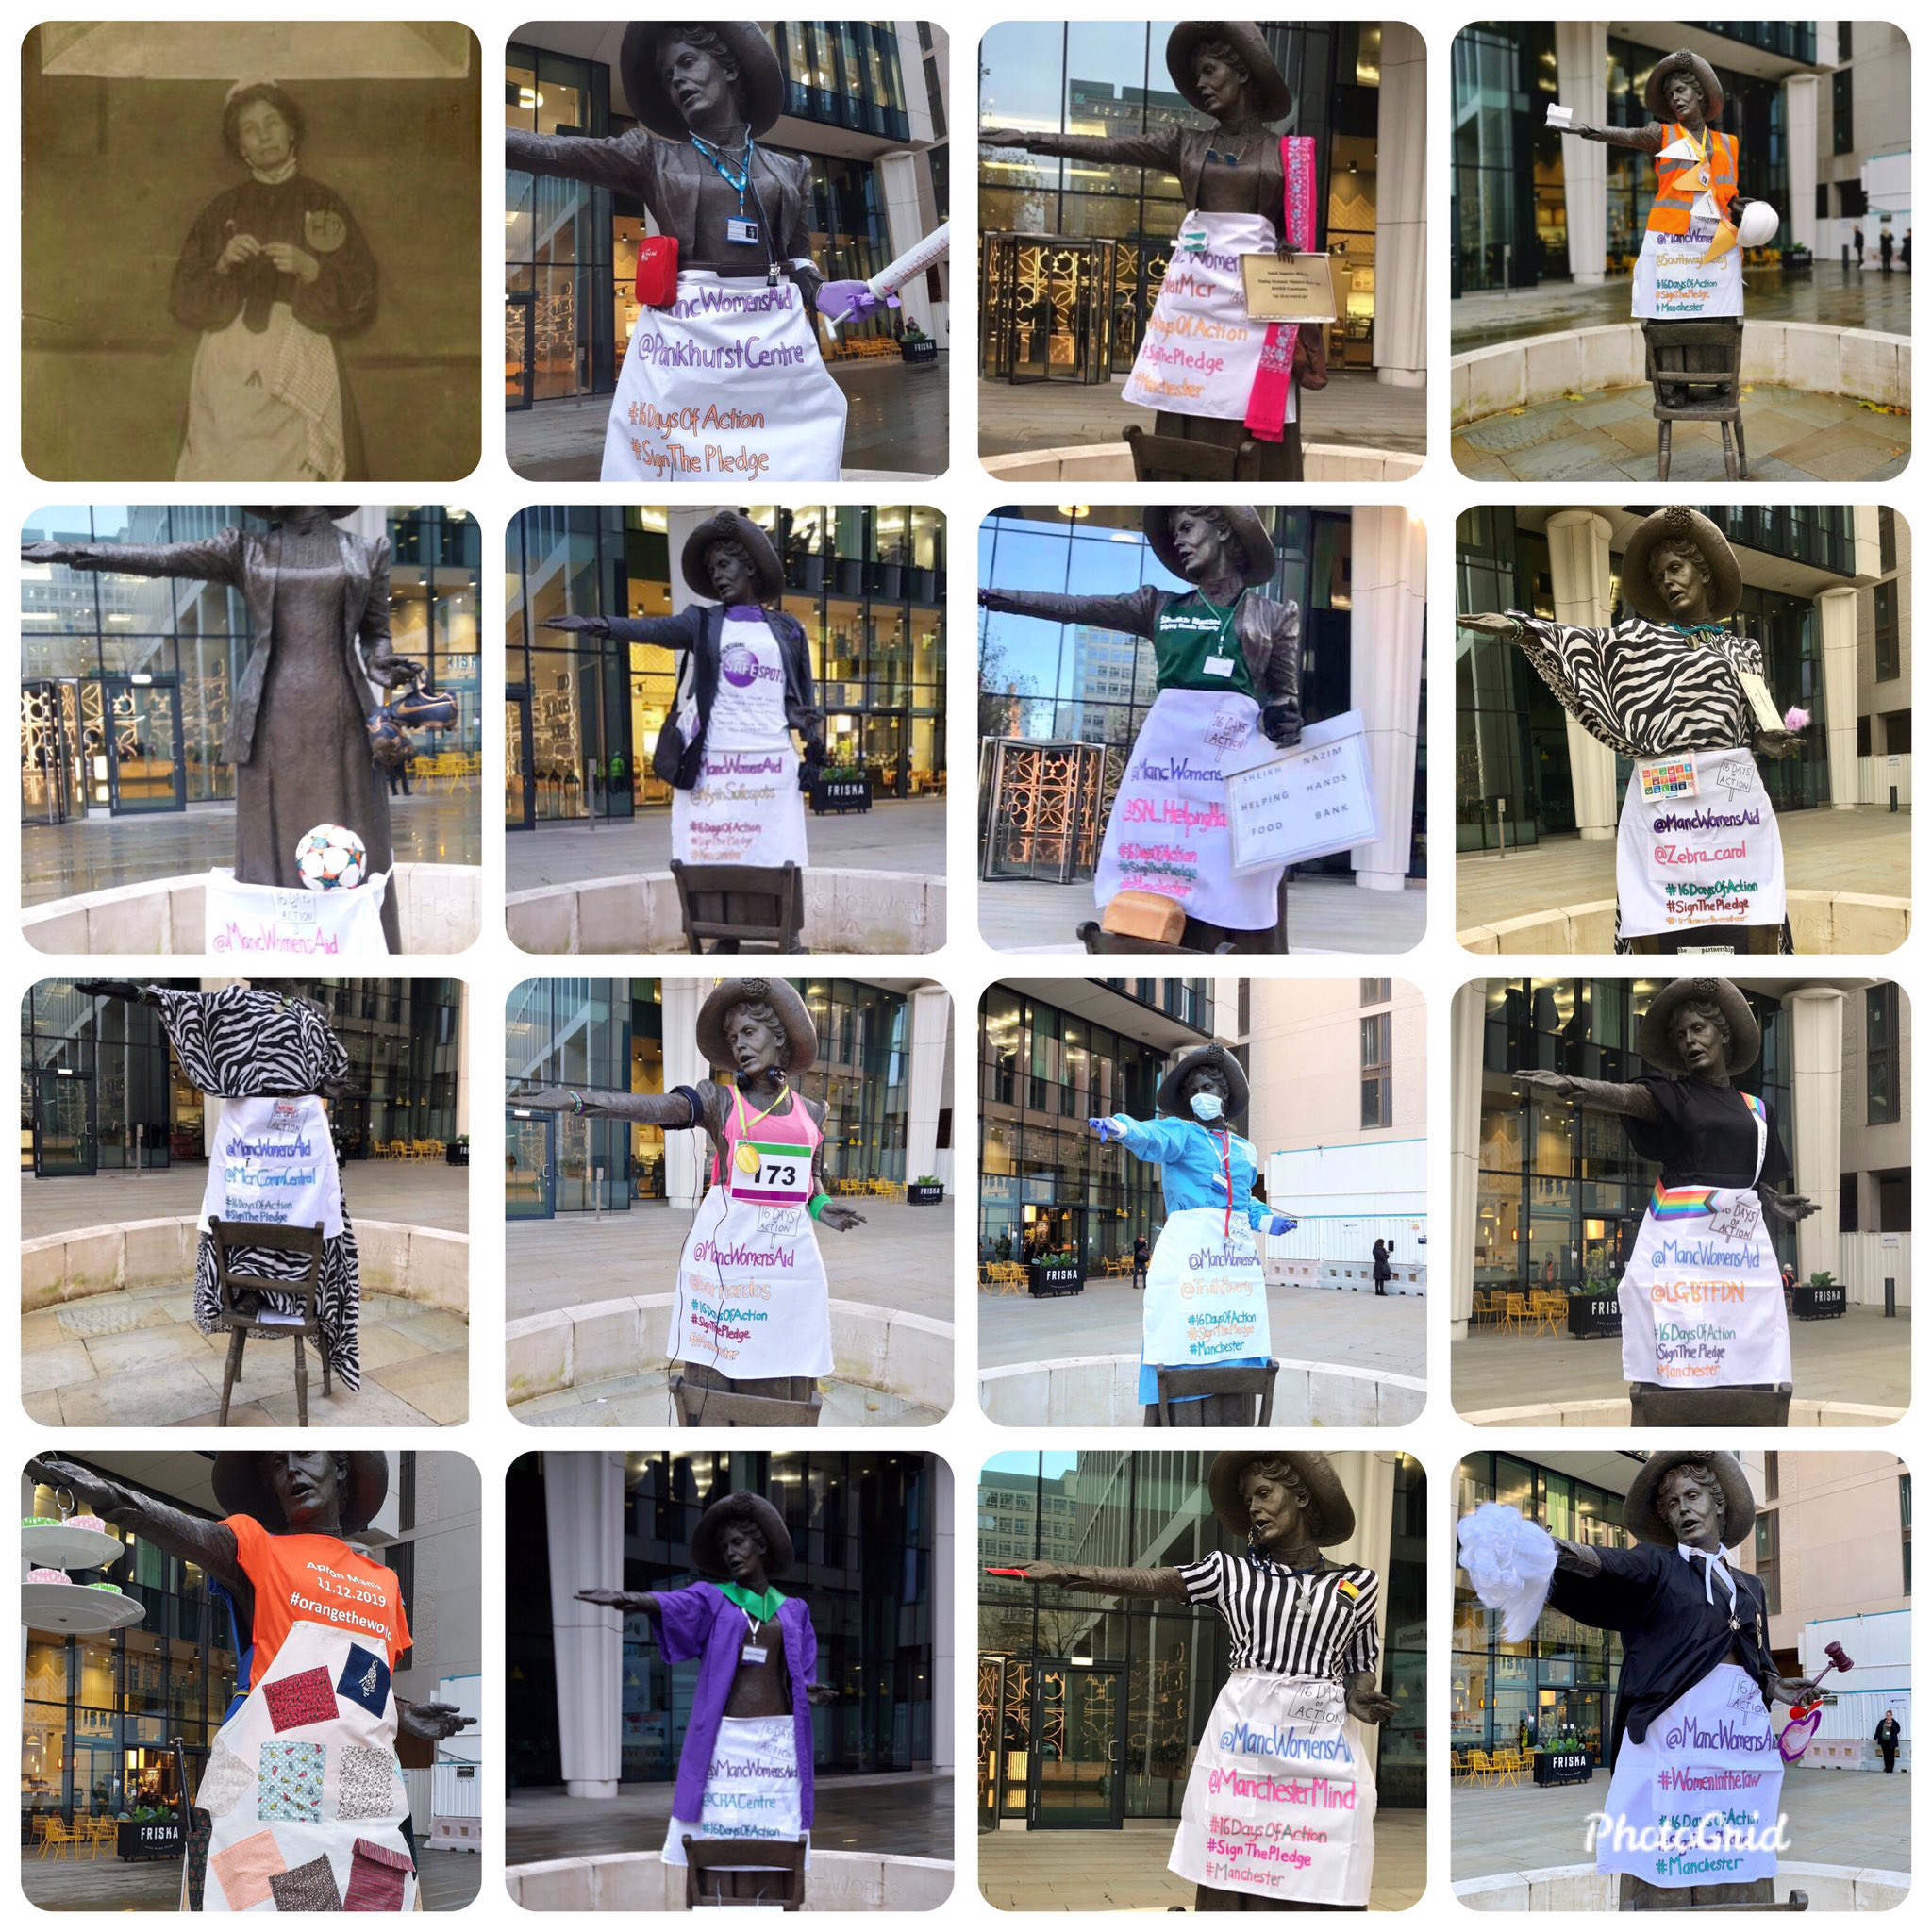 Multiple images of the our Emmeline statue dressed up to raise awareness of violence against women